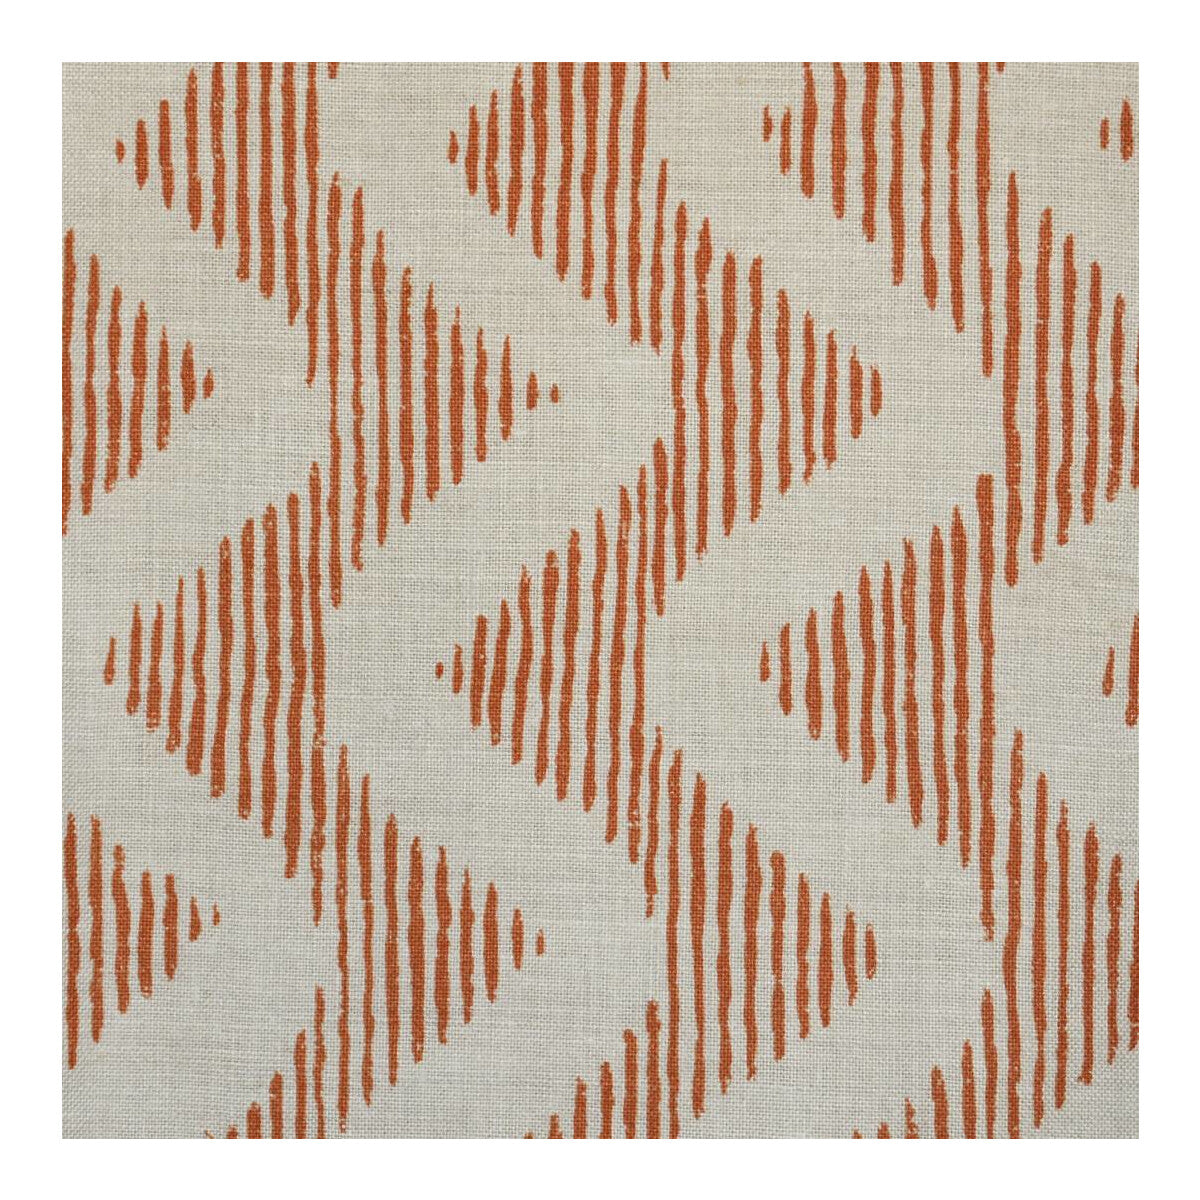 Colebrook fabric in coral/natrl color - pattern BFC-3632.12.0 - by Lee Jofa in the Blithfield collection